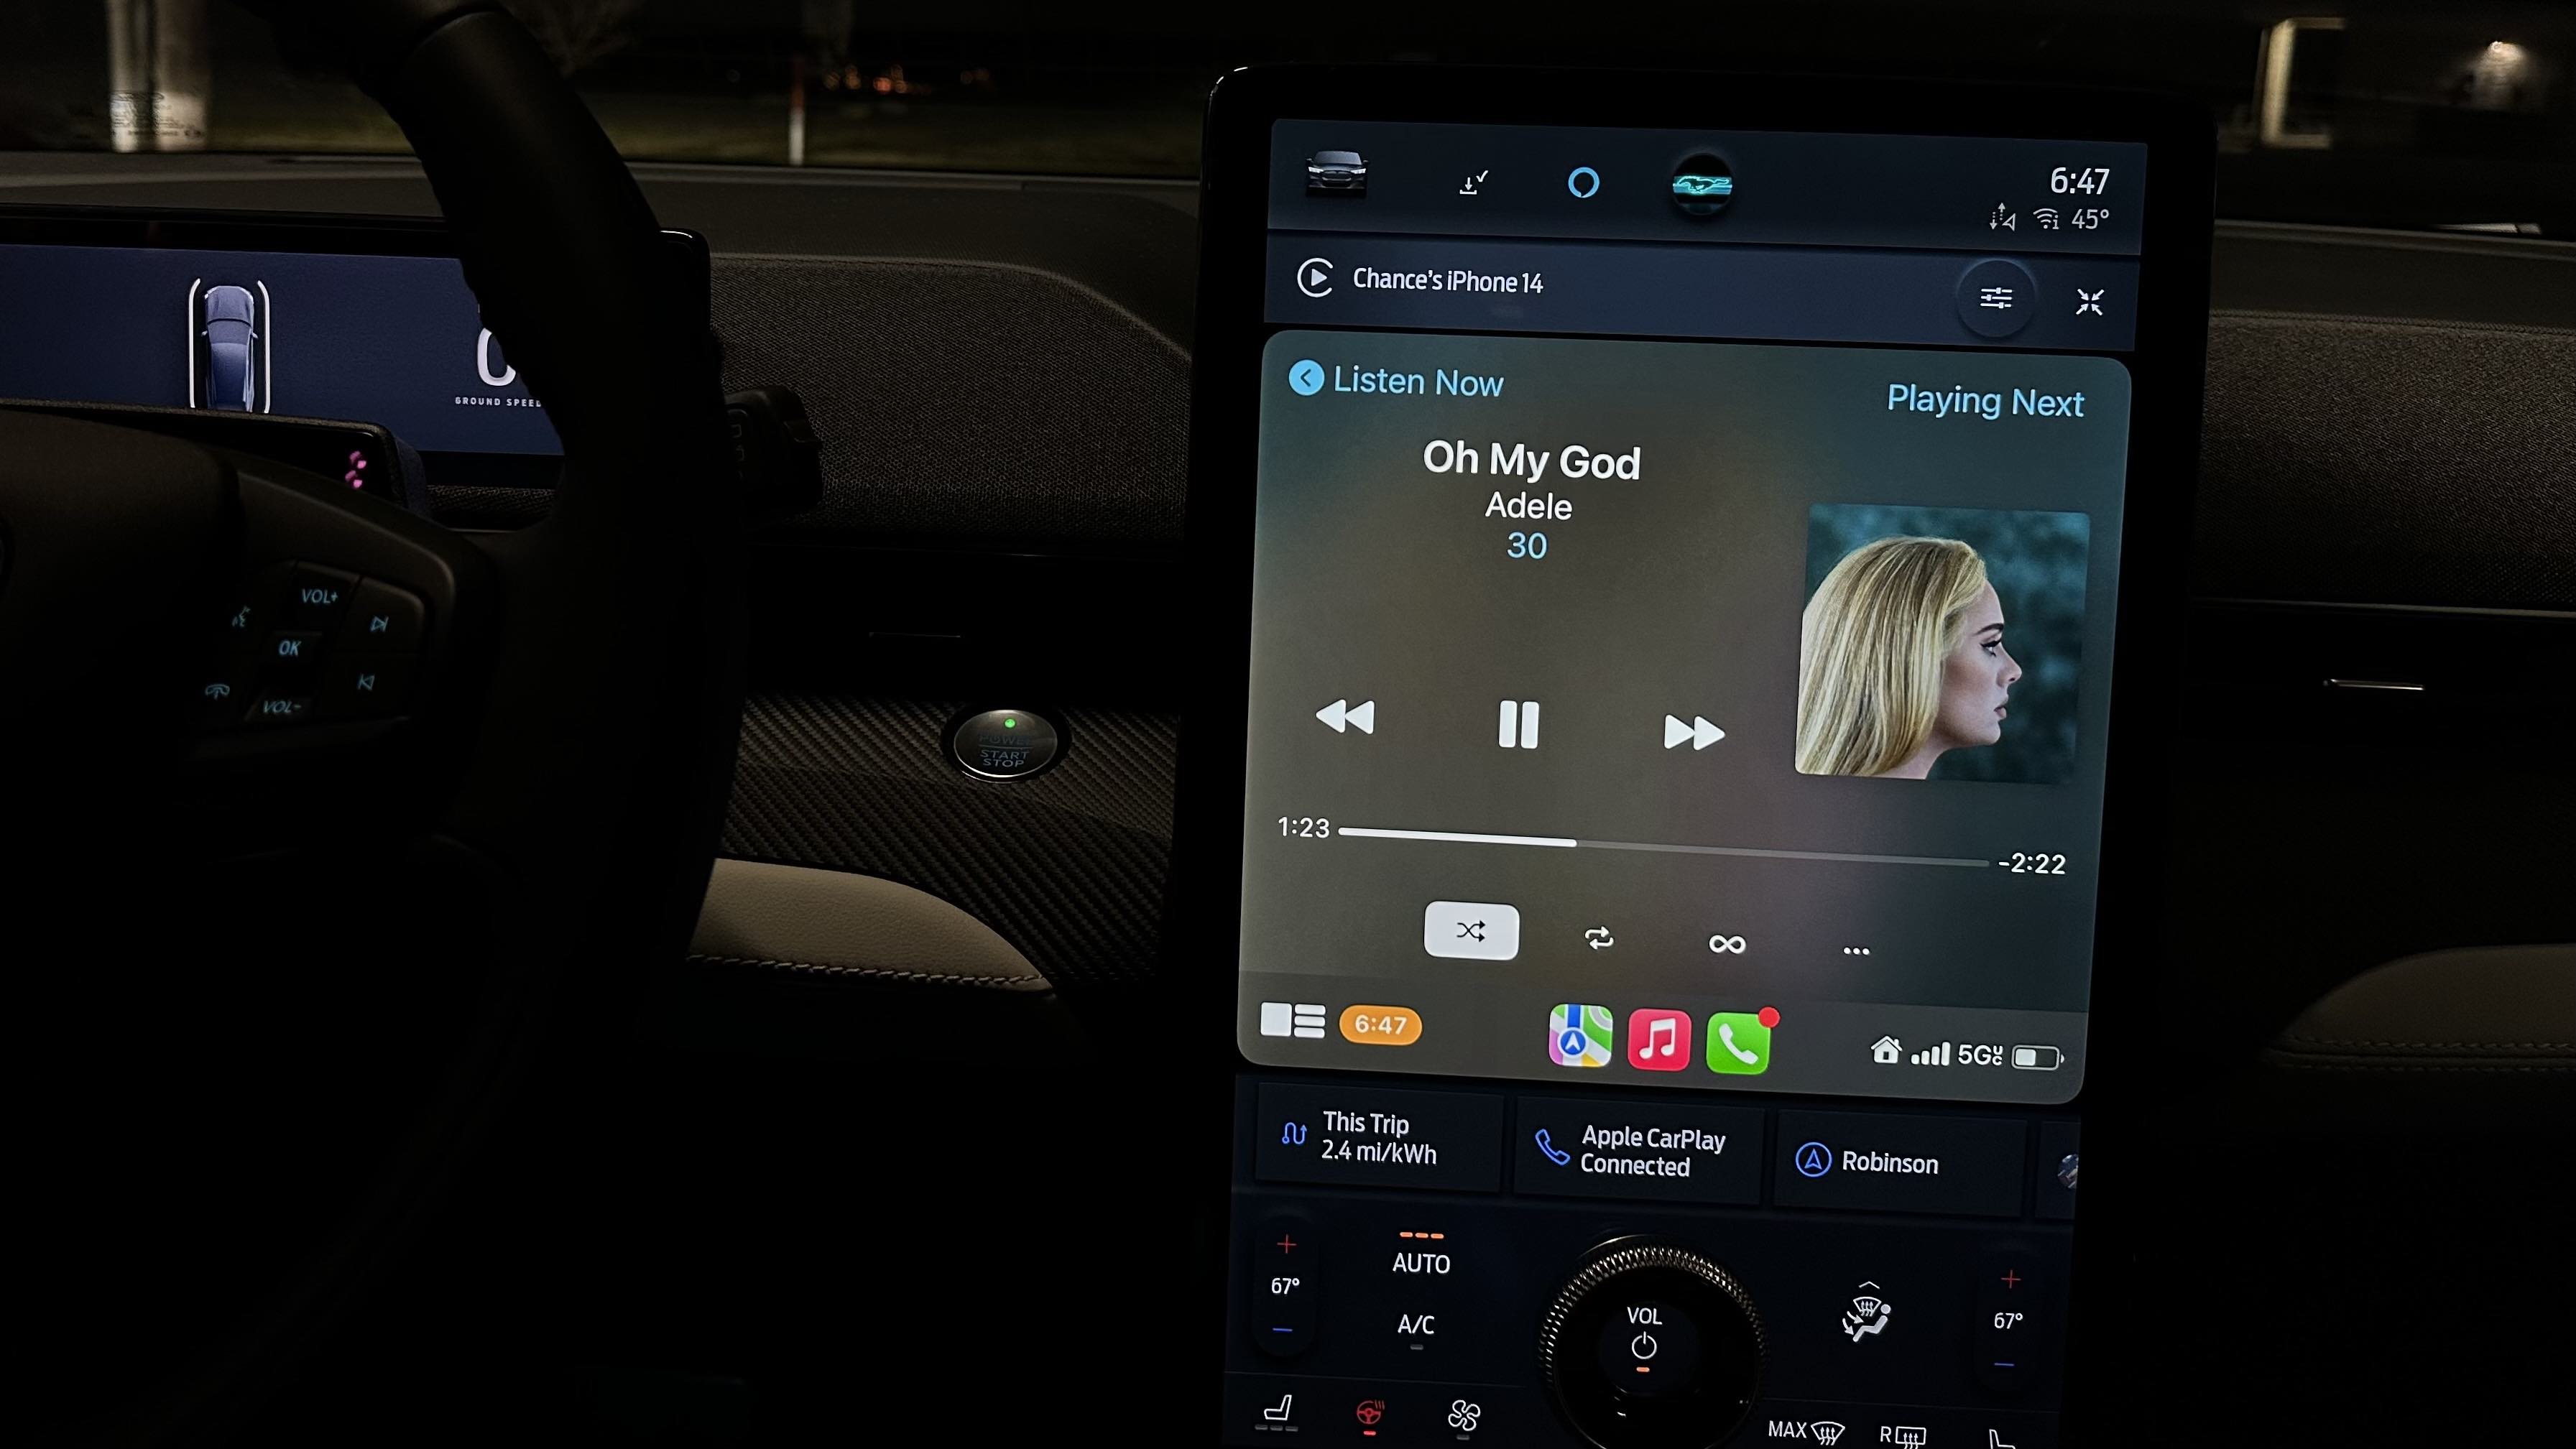 iOS 16.3 fixes pesky CarPlay bug that broke Find My support in